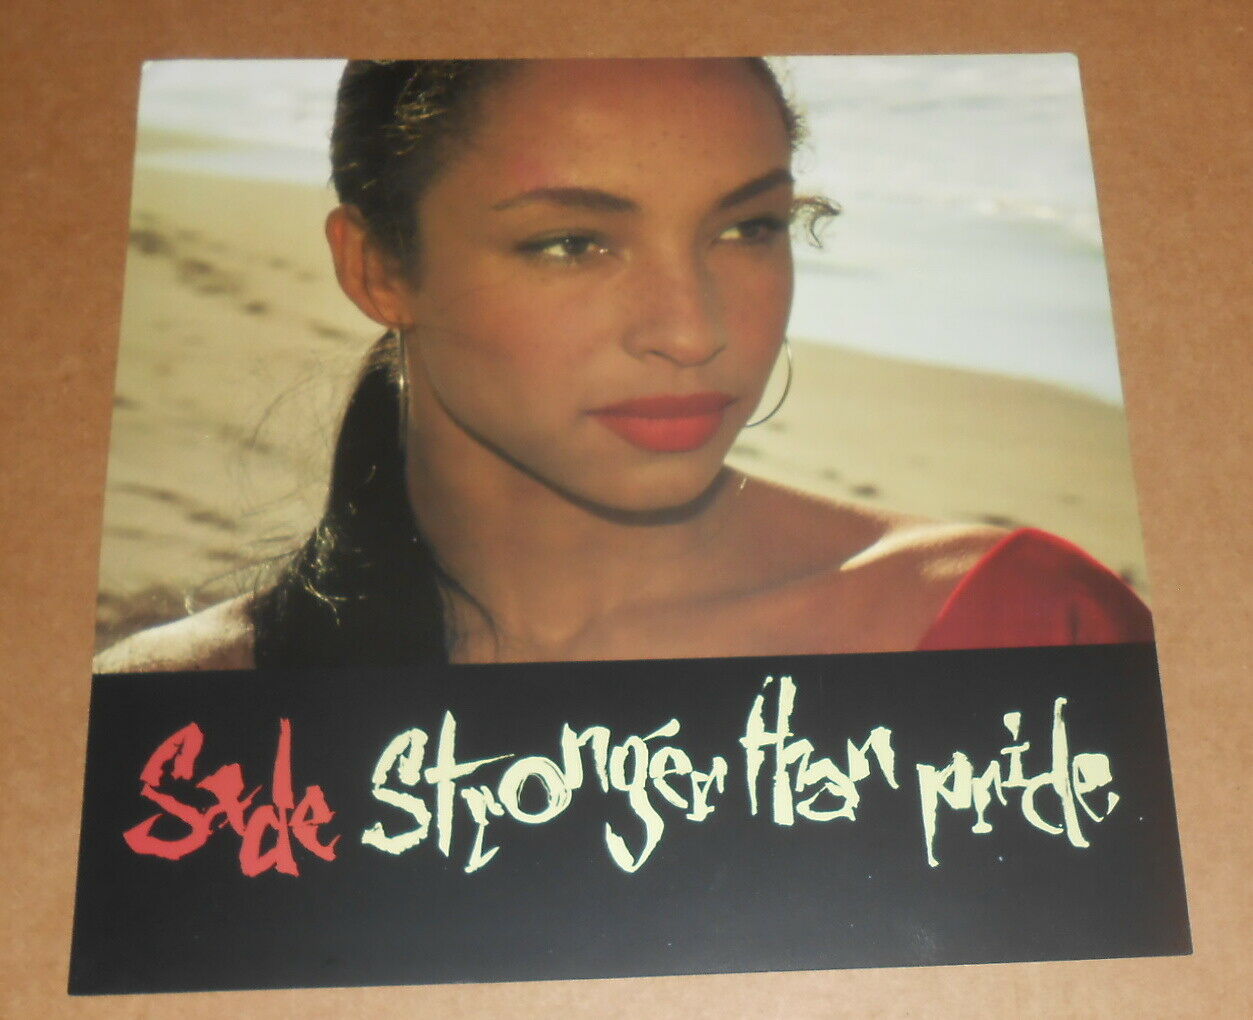 Sade Stronger Than Pride Poster 2-sided Flat Square Promo 12x12